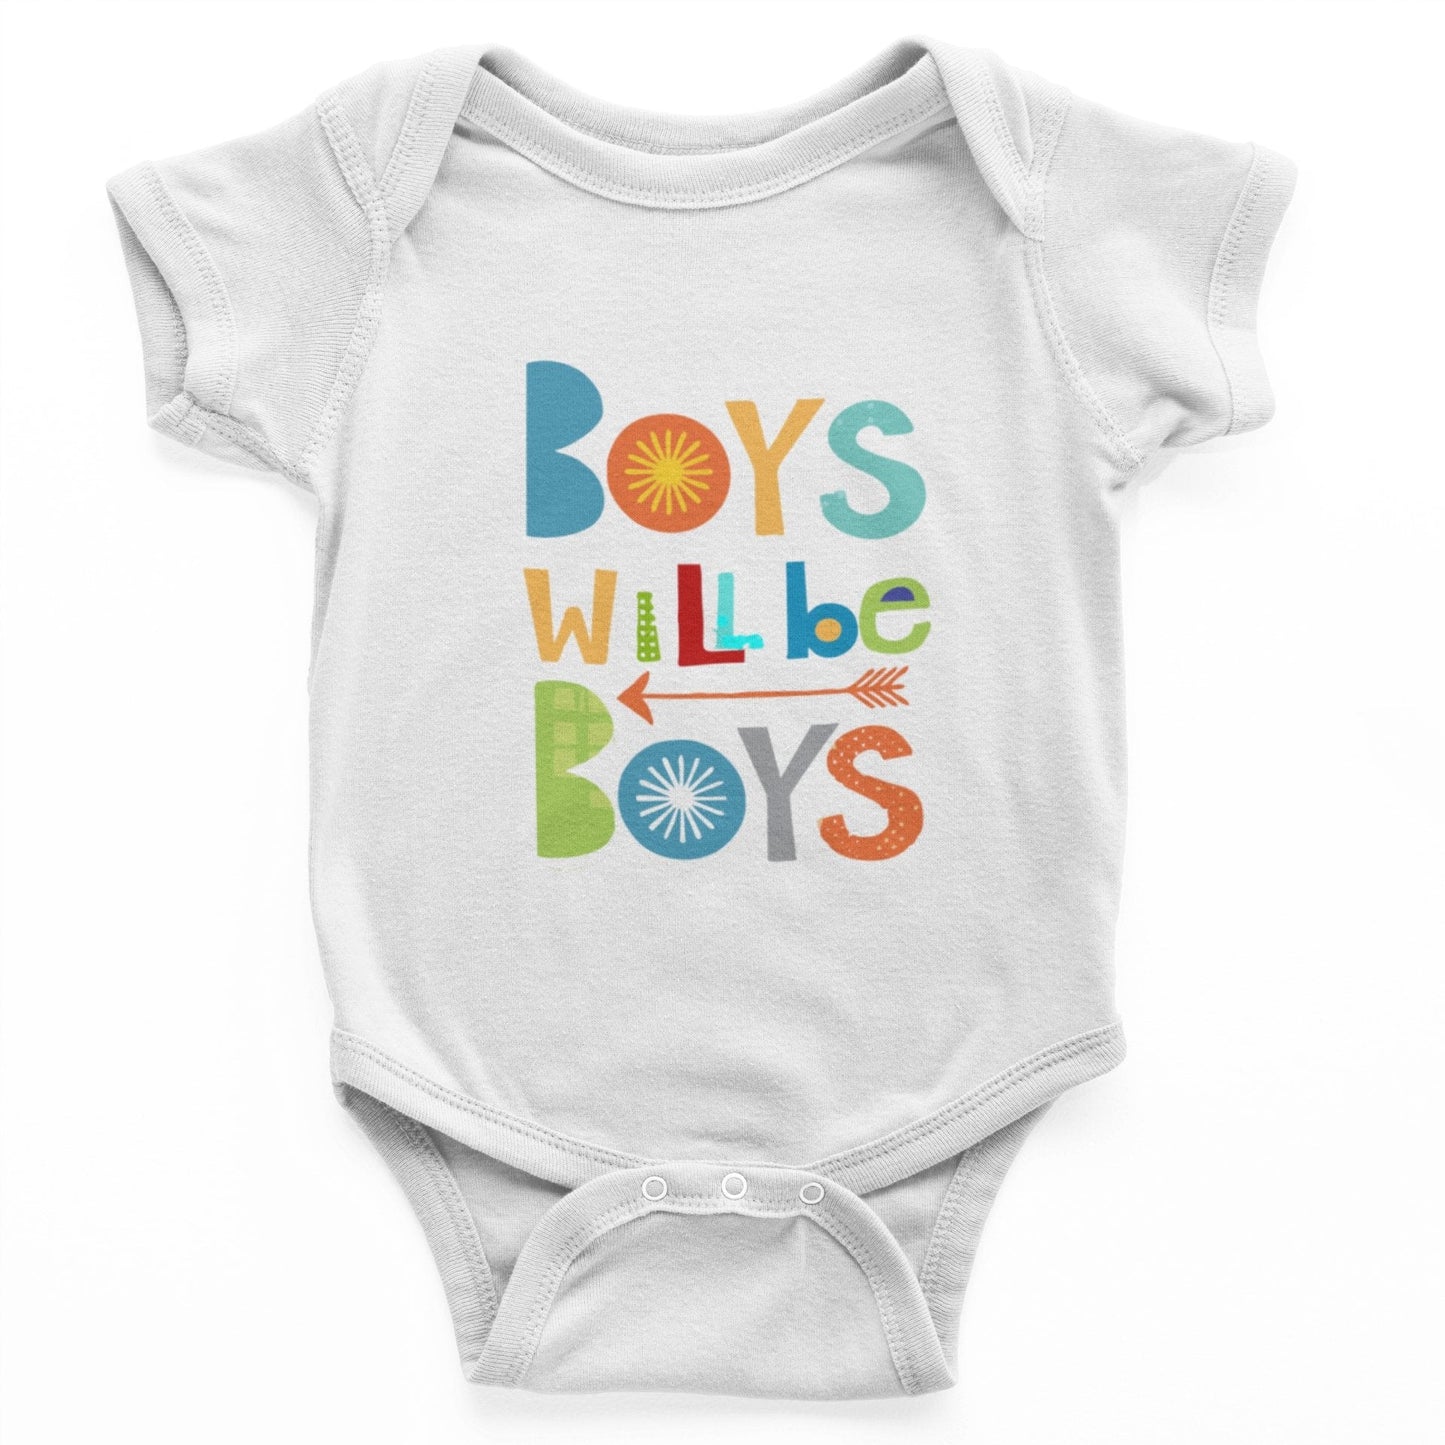 thelegalgang,Boys will be Boys Onesies for Babies,.